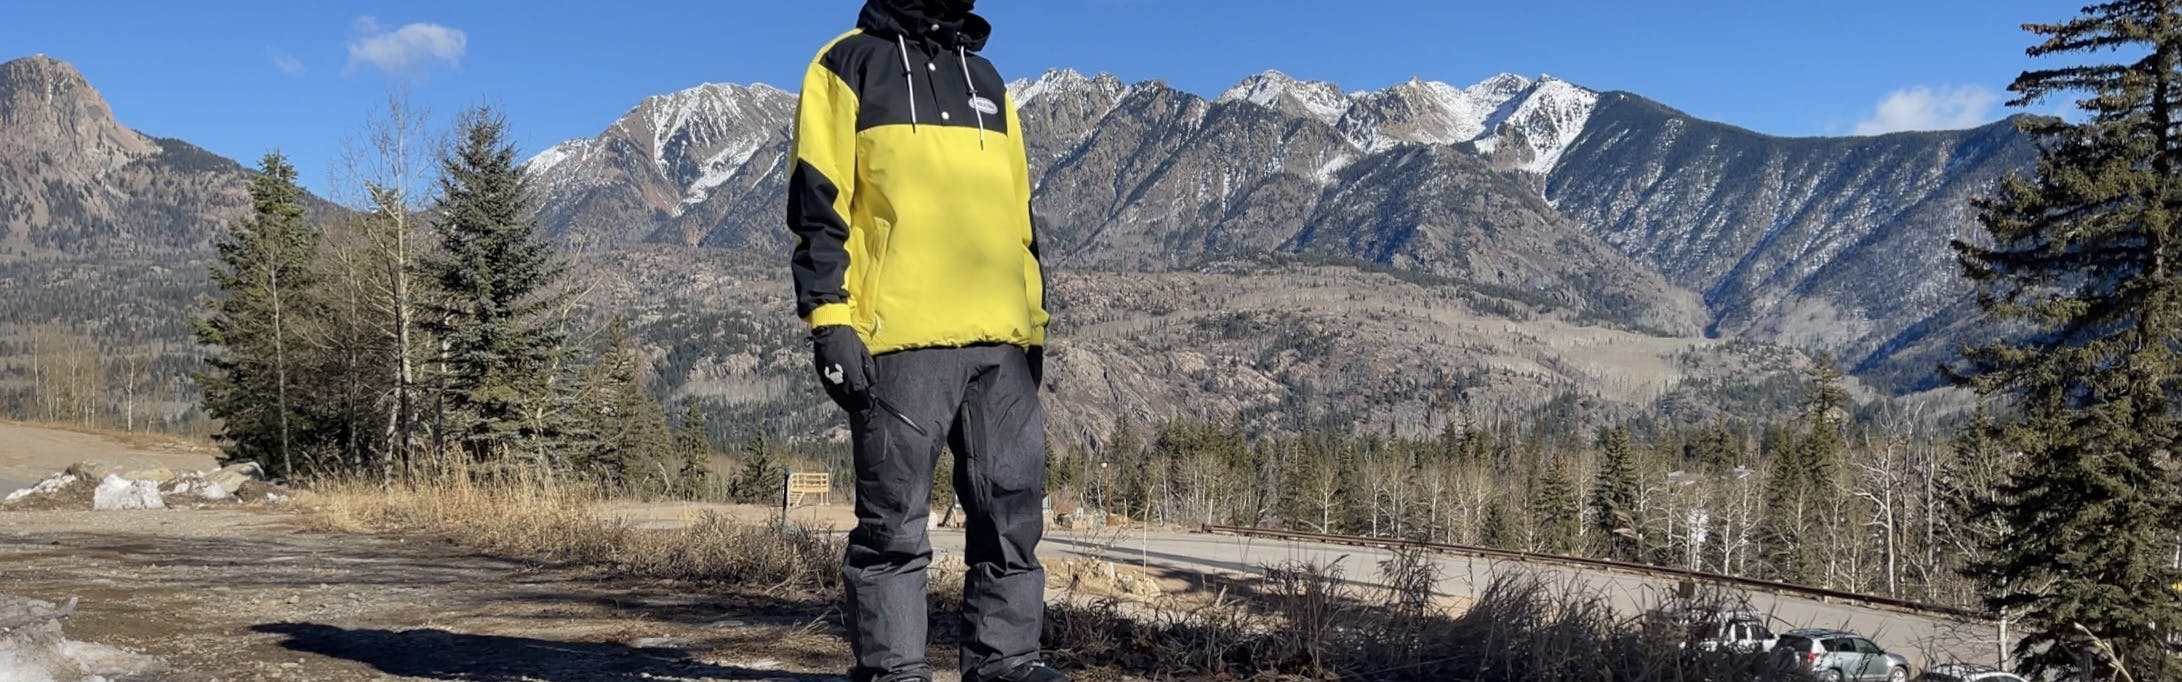 A snowboarder in the Volcom Men's L Gore Tex Pants.